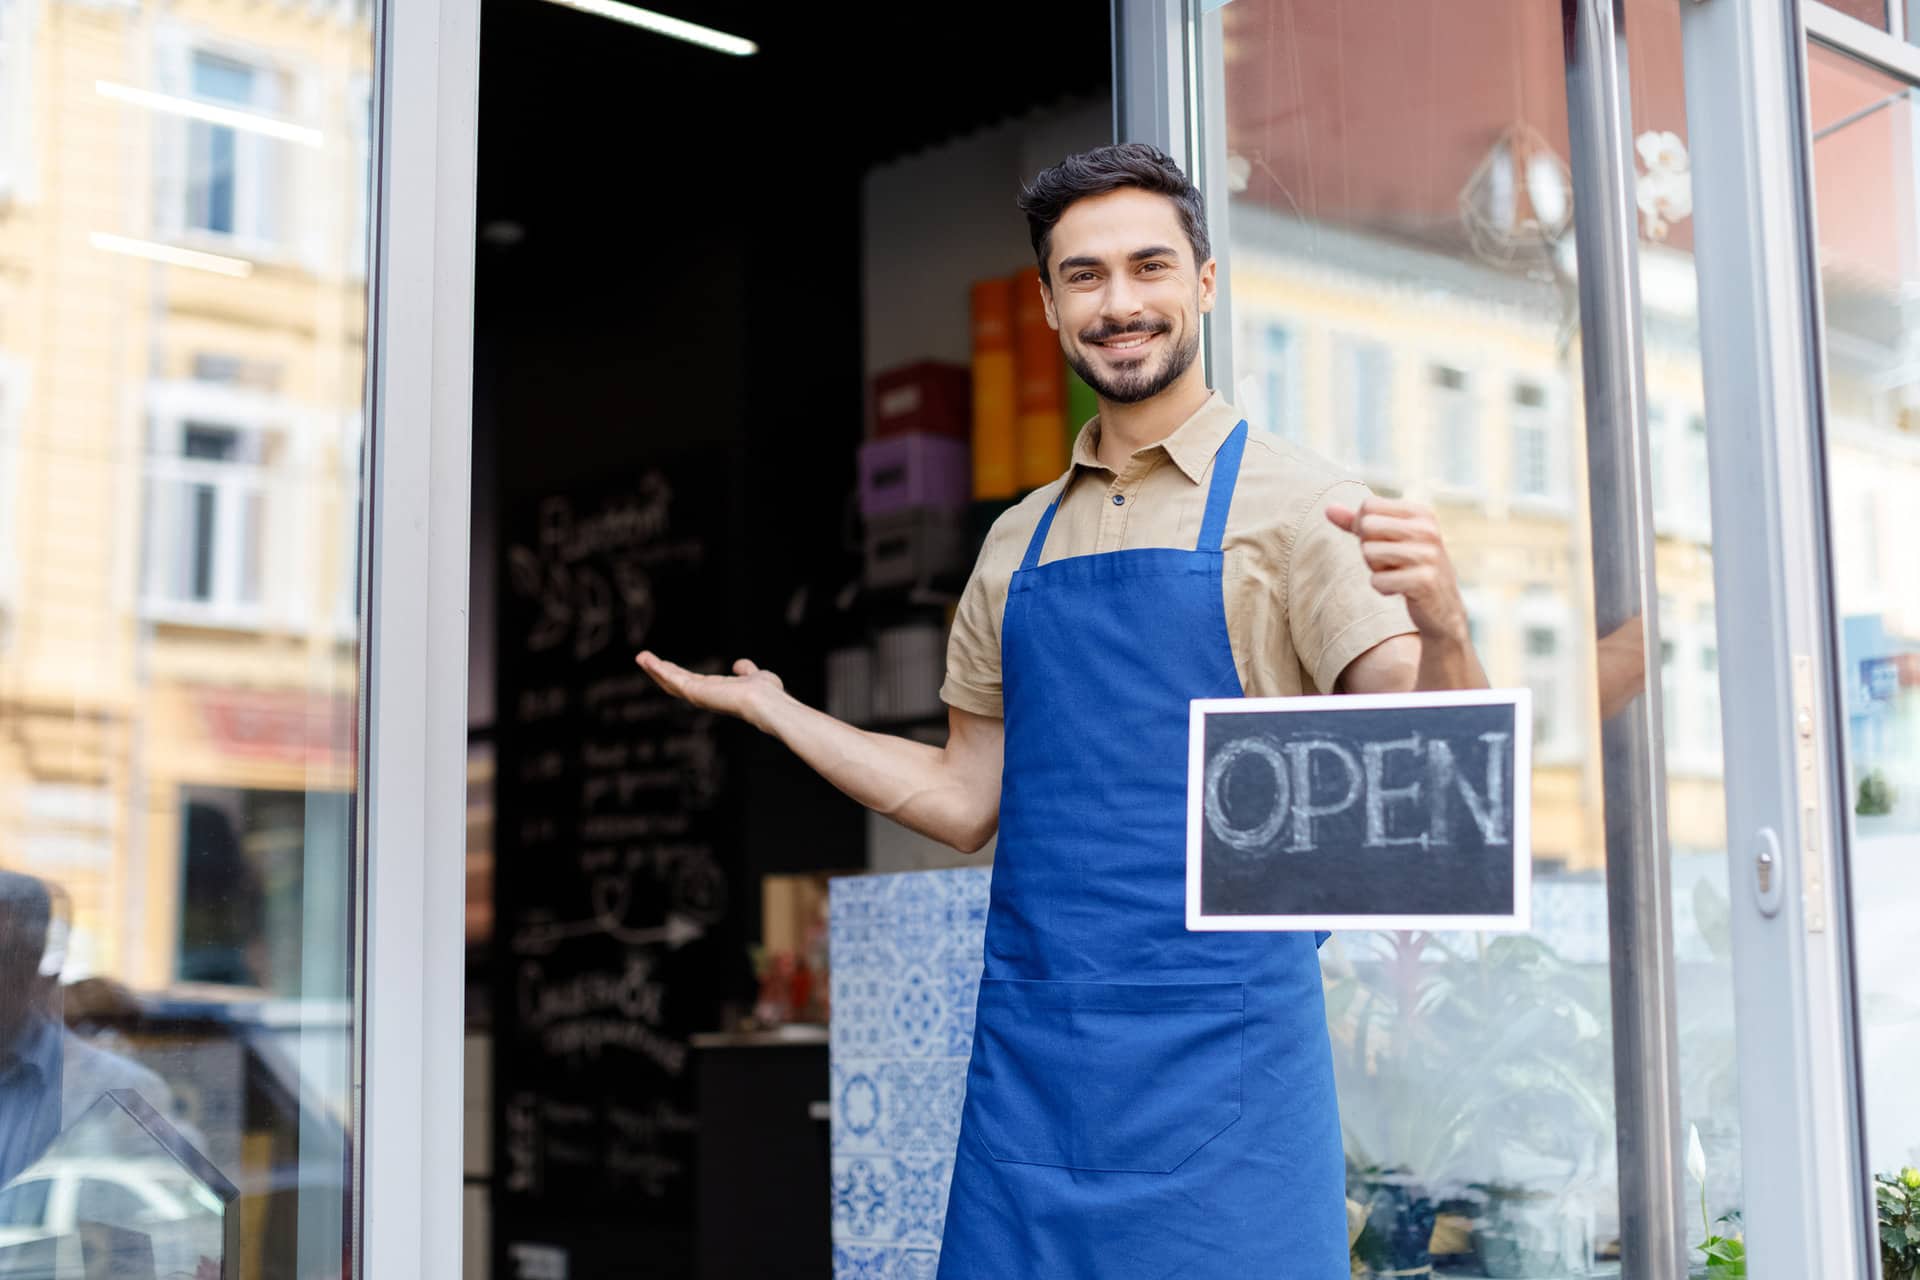 Local SEO is important for helping businesses stay open. 